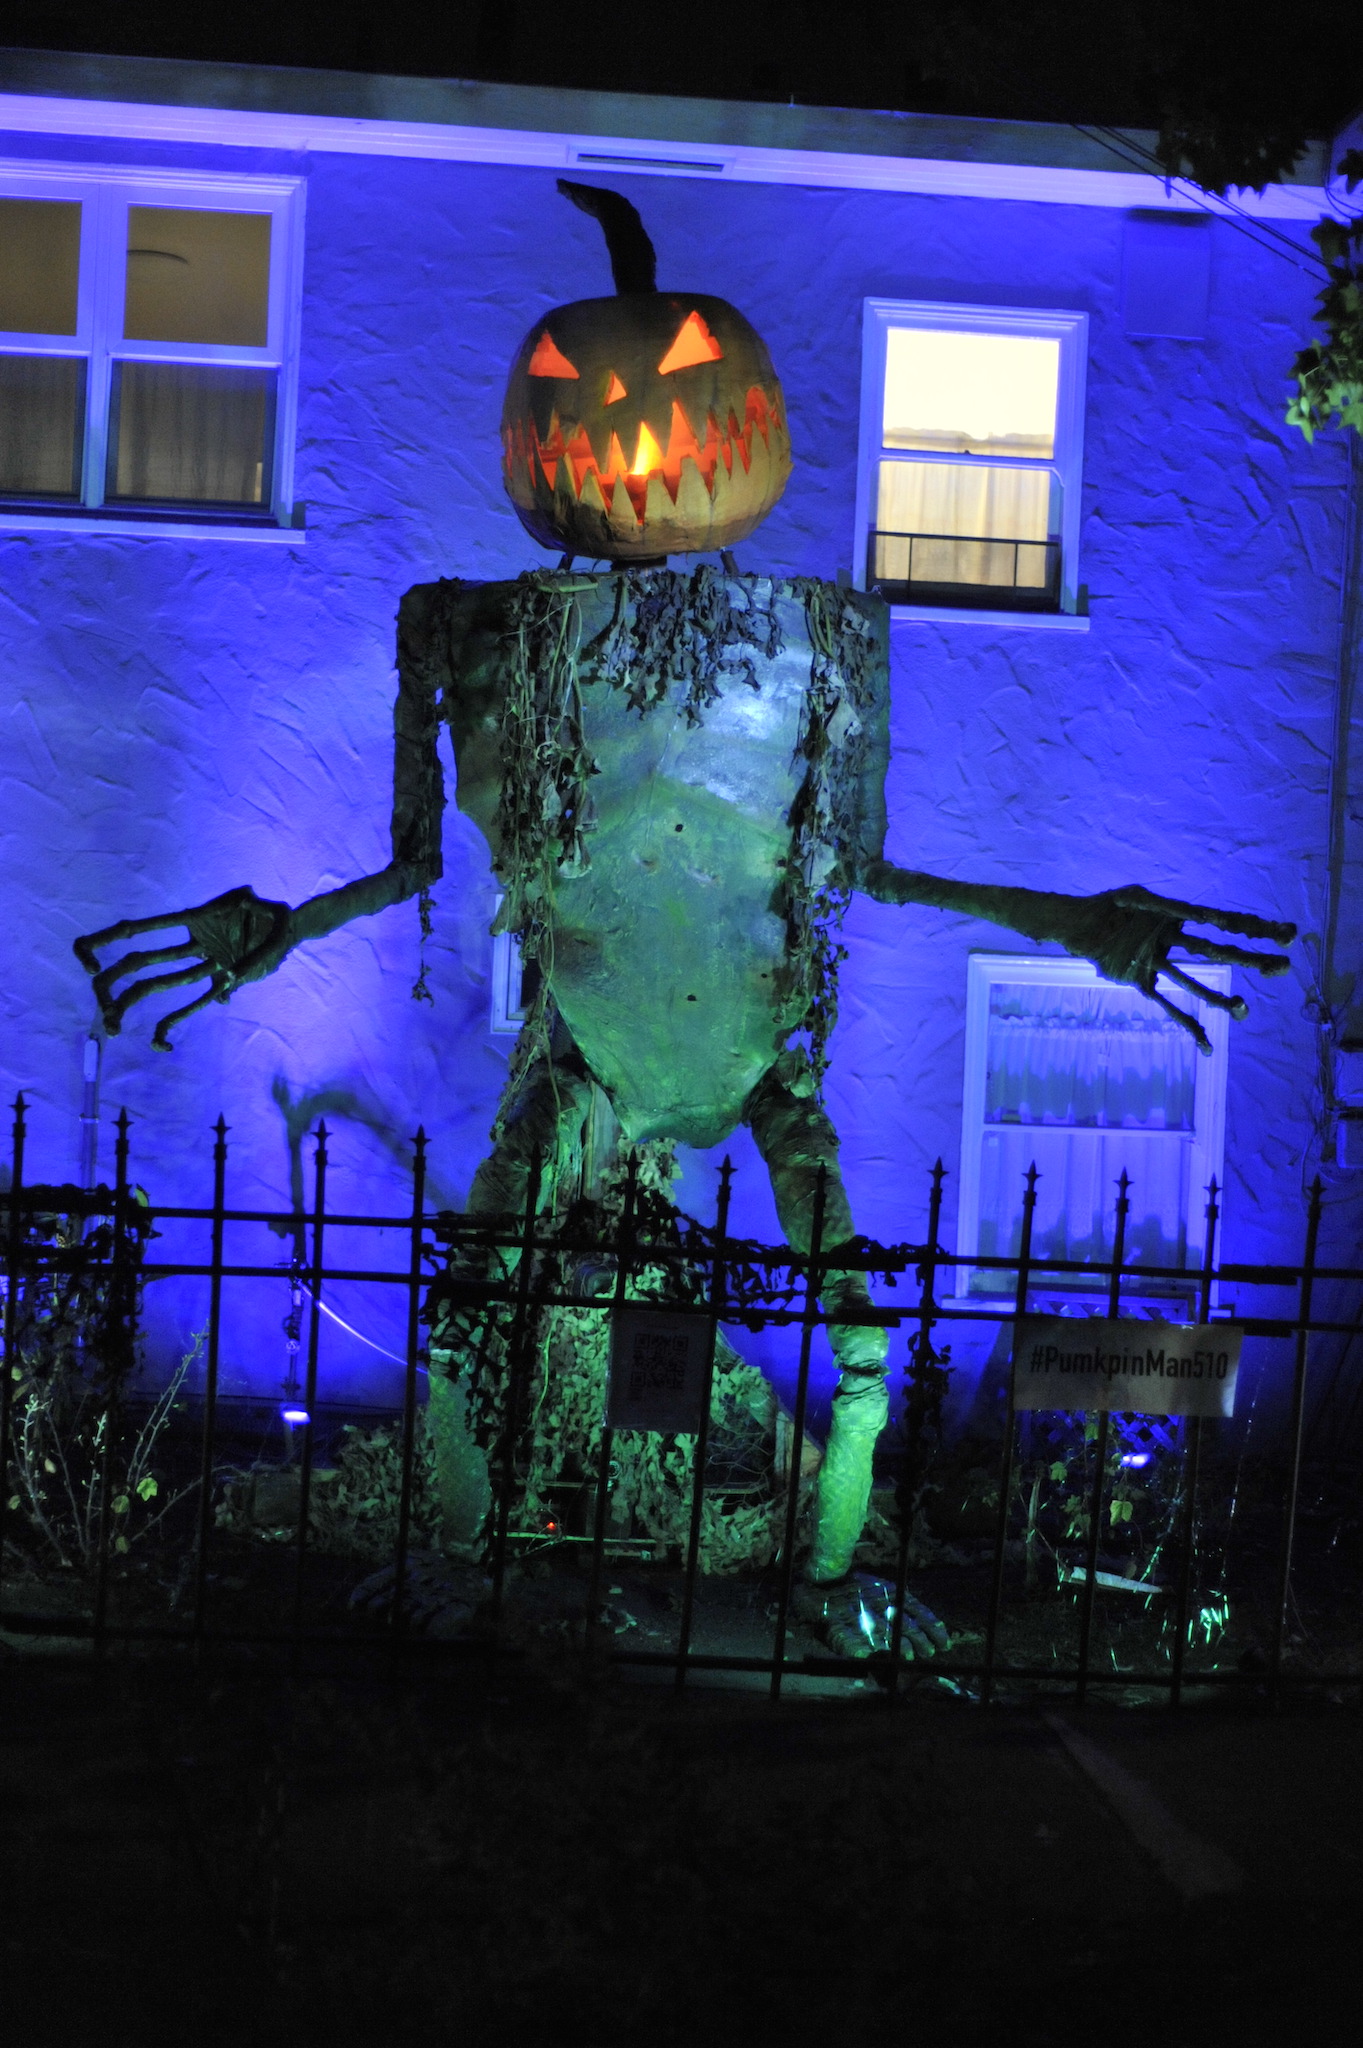 Pumpkin Man standing up with raised arm and open, glowing mouth, bathed in green light against a purple background